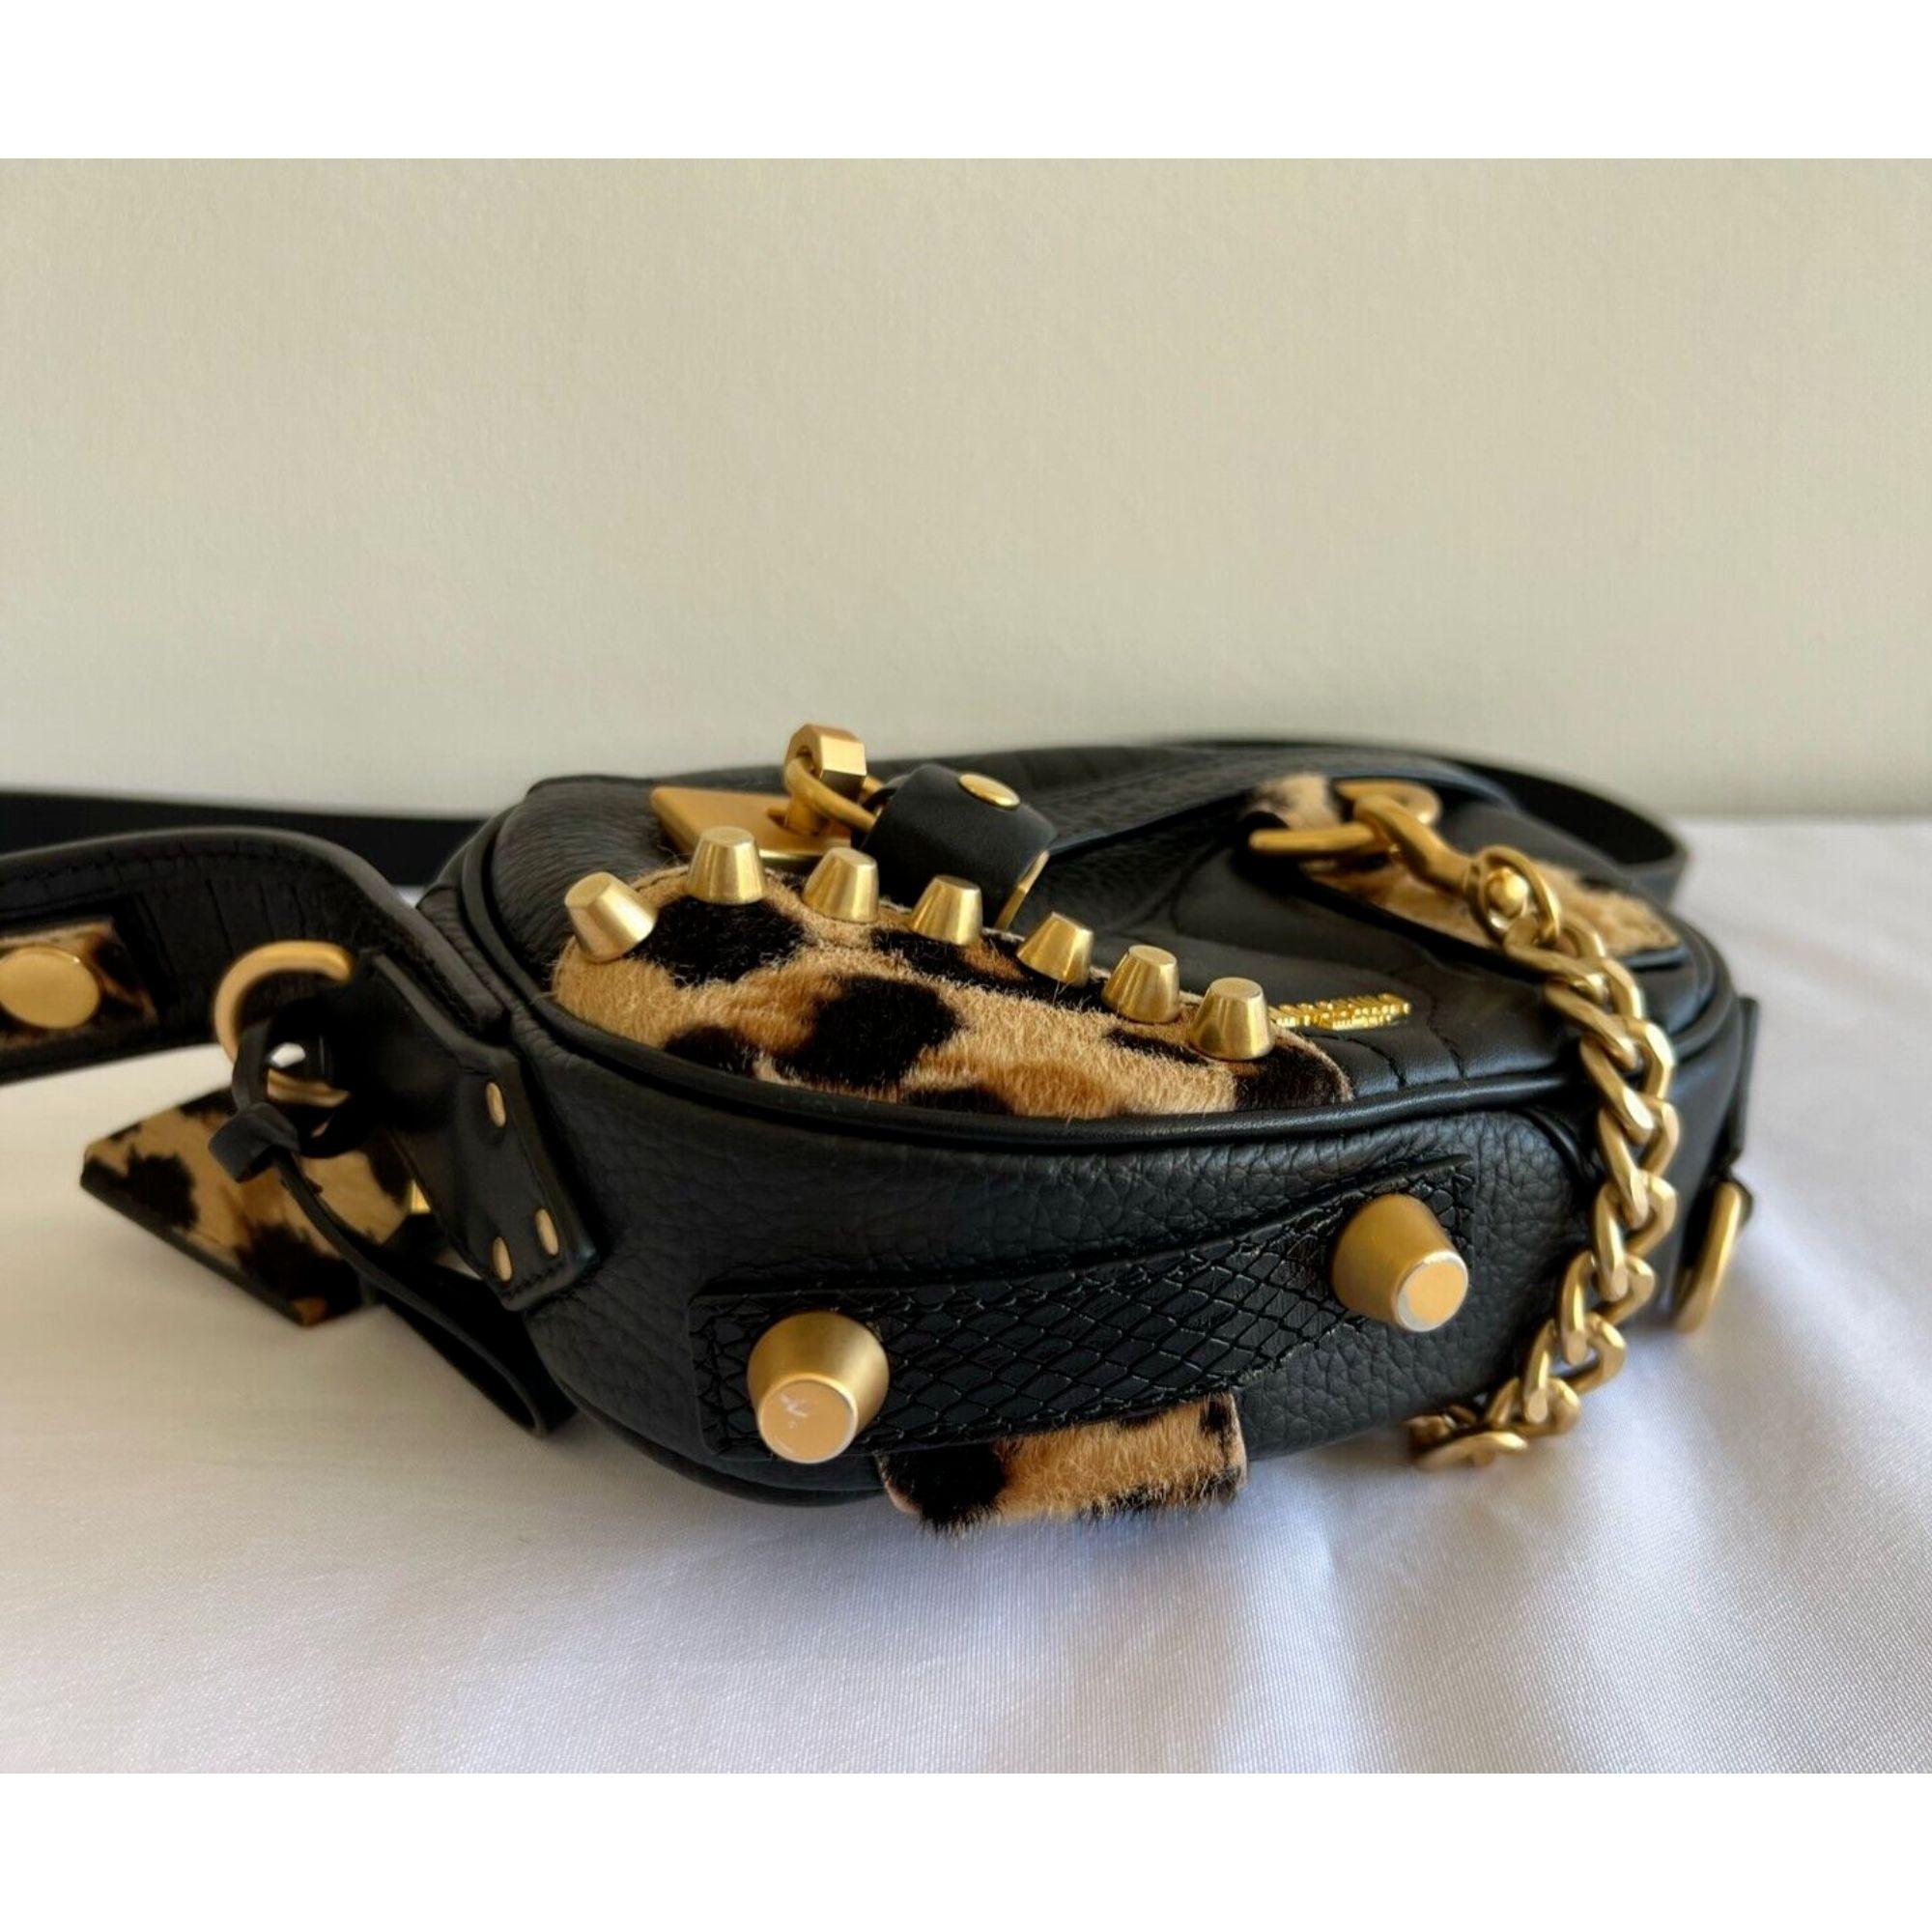 Women's AW21 Moschino Couture Gold Leopard Black Leather Shoulder Bag by Jeremy Scott For Sale